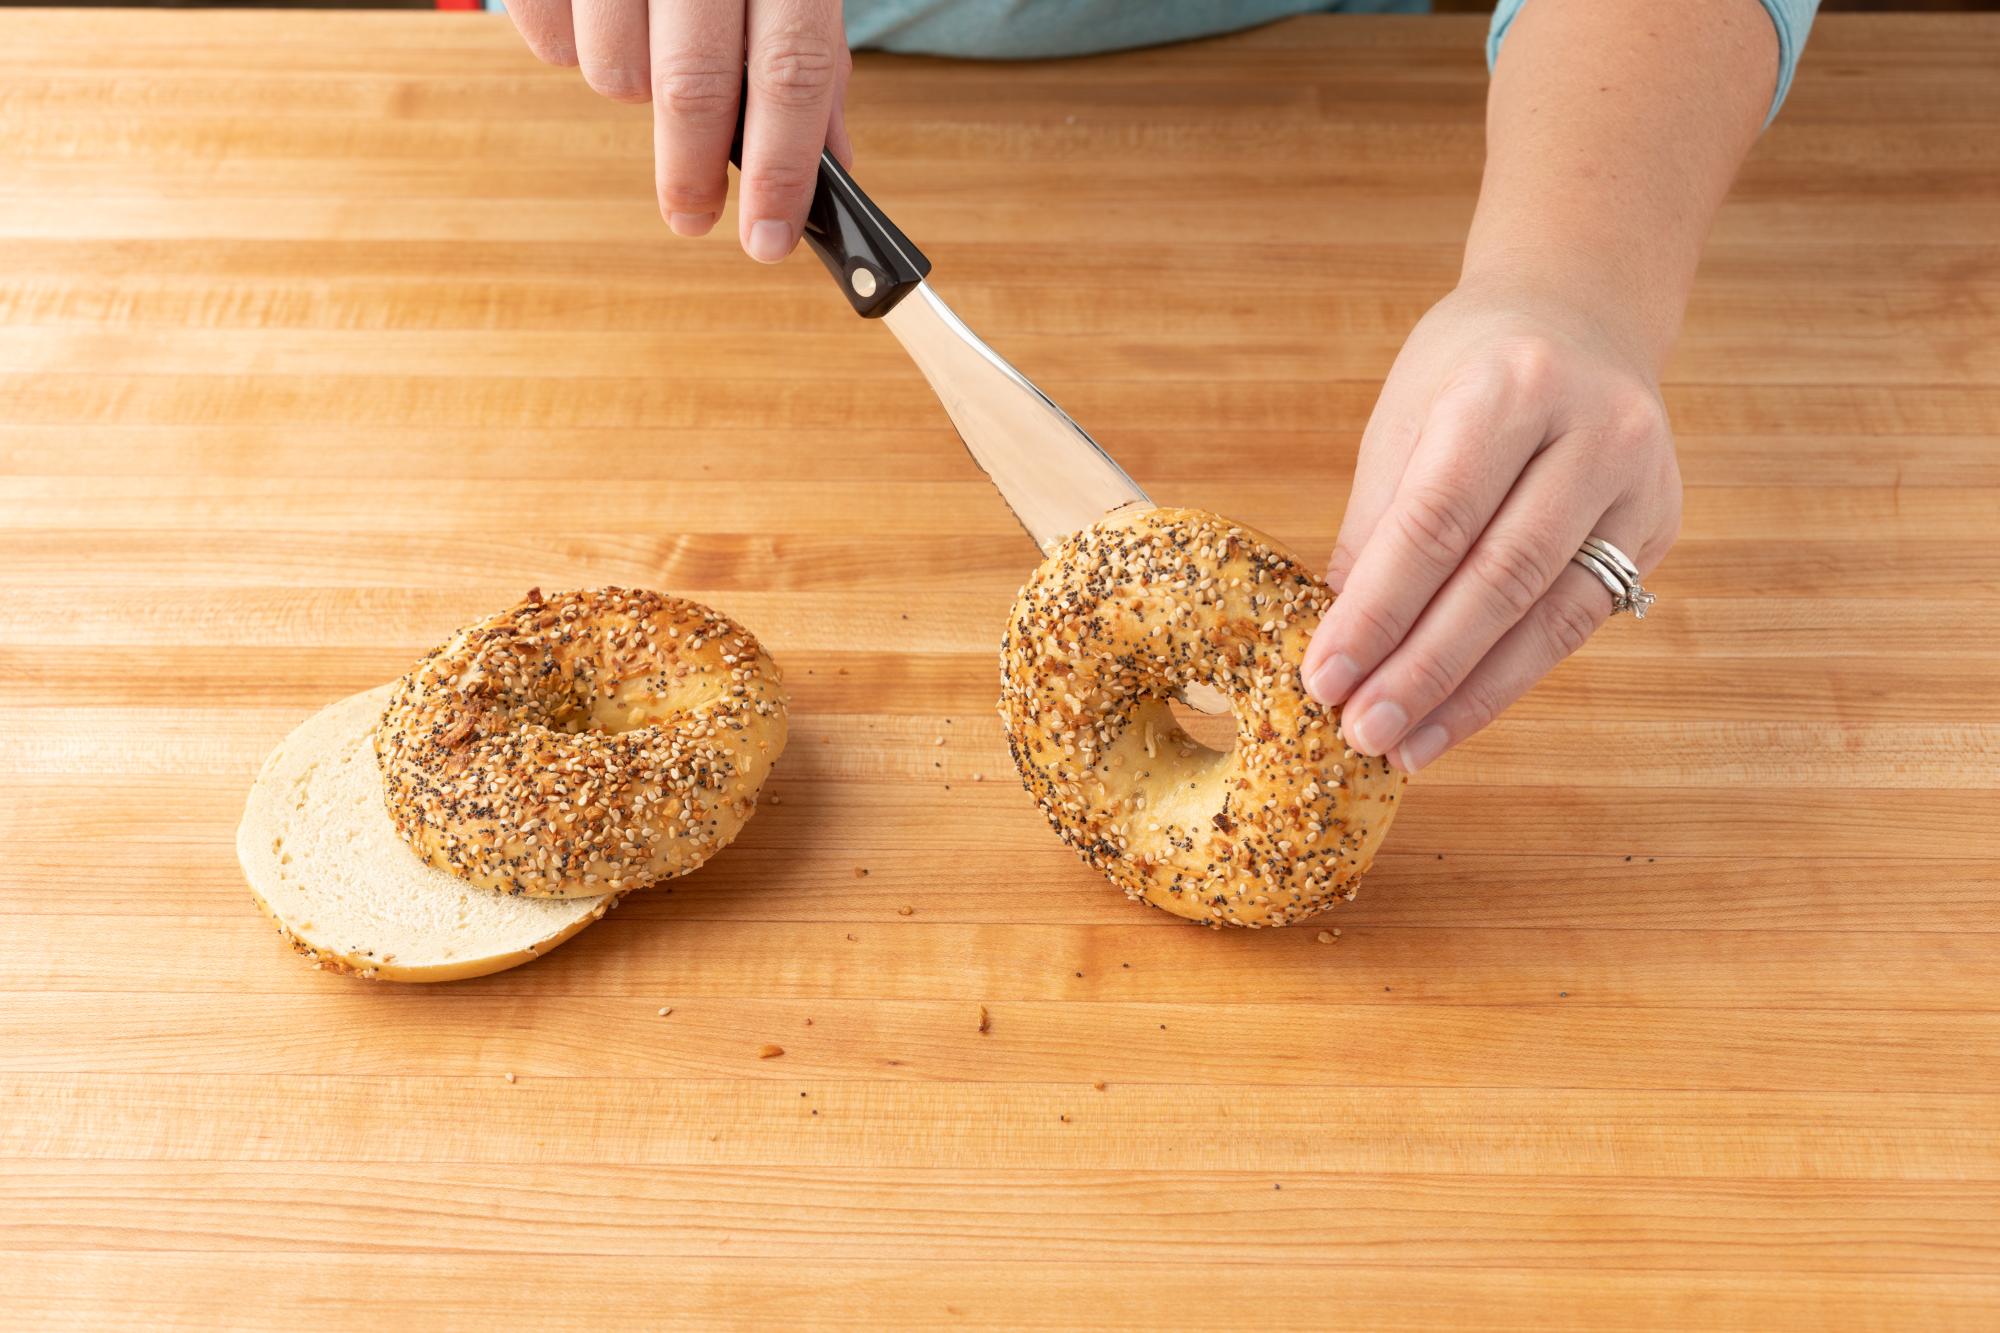 Using the Spatula Spreader to slice the bagel in half.